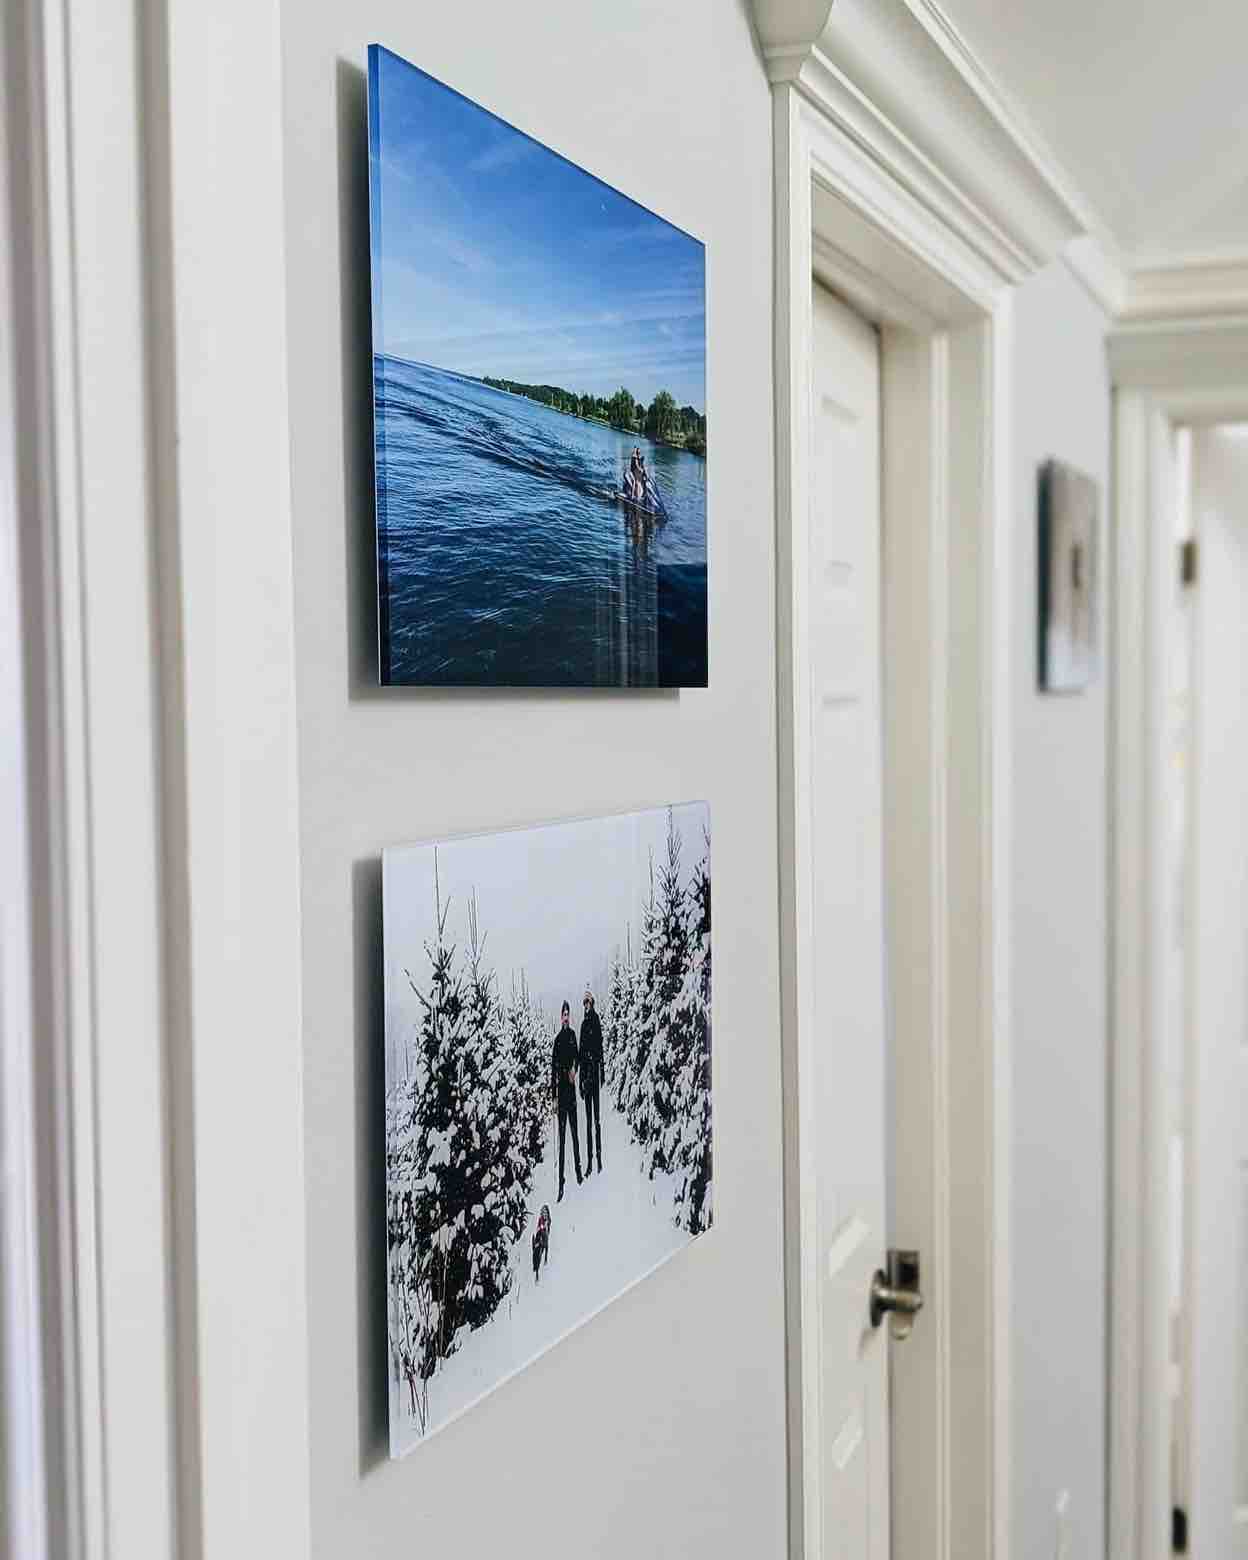 Two Acrylic Prints Displayed in Posterjack Customer's Home